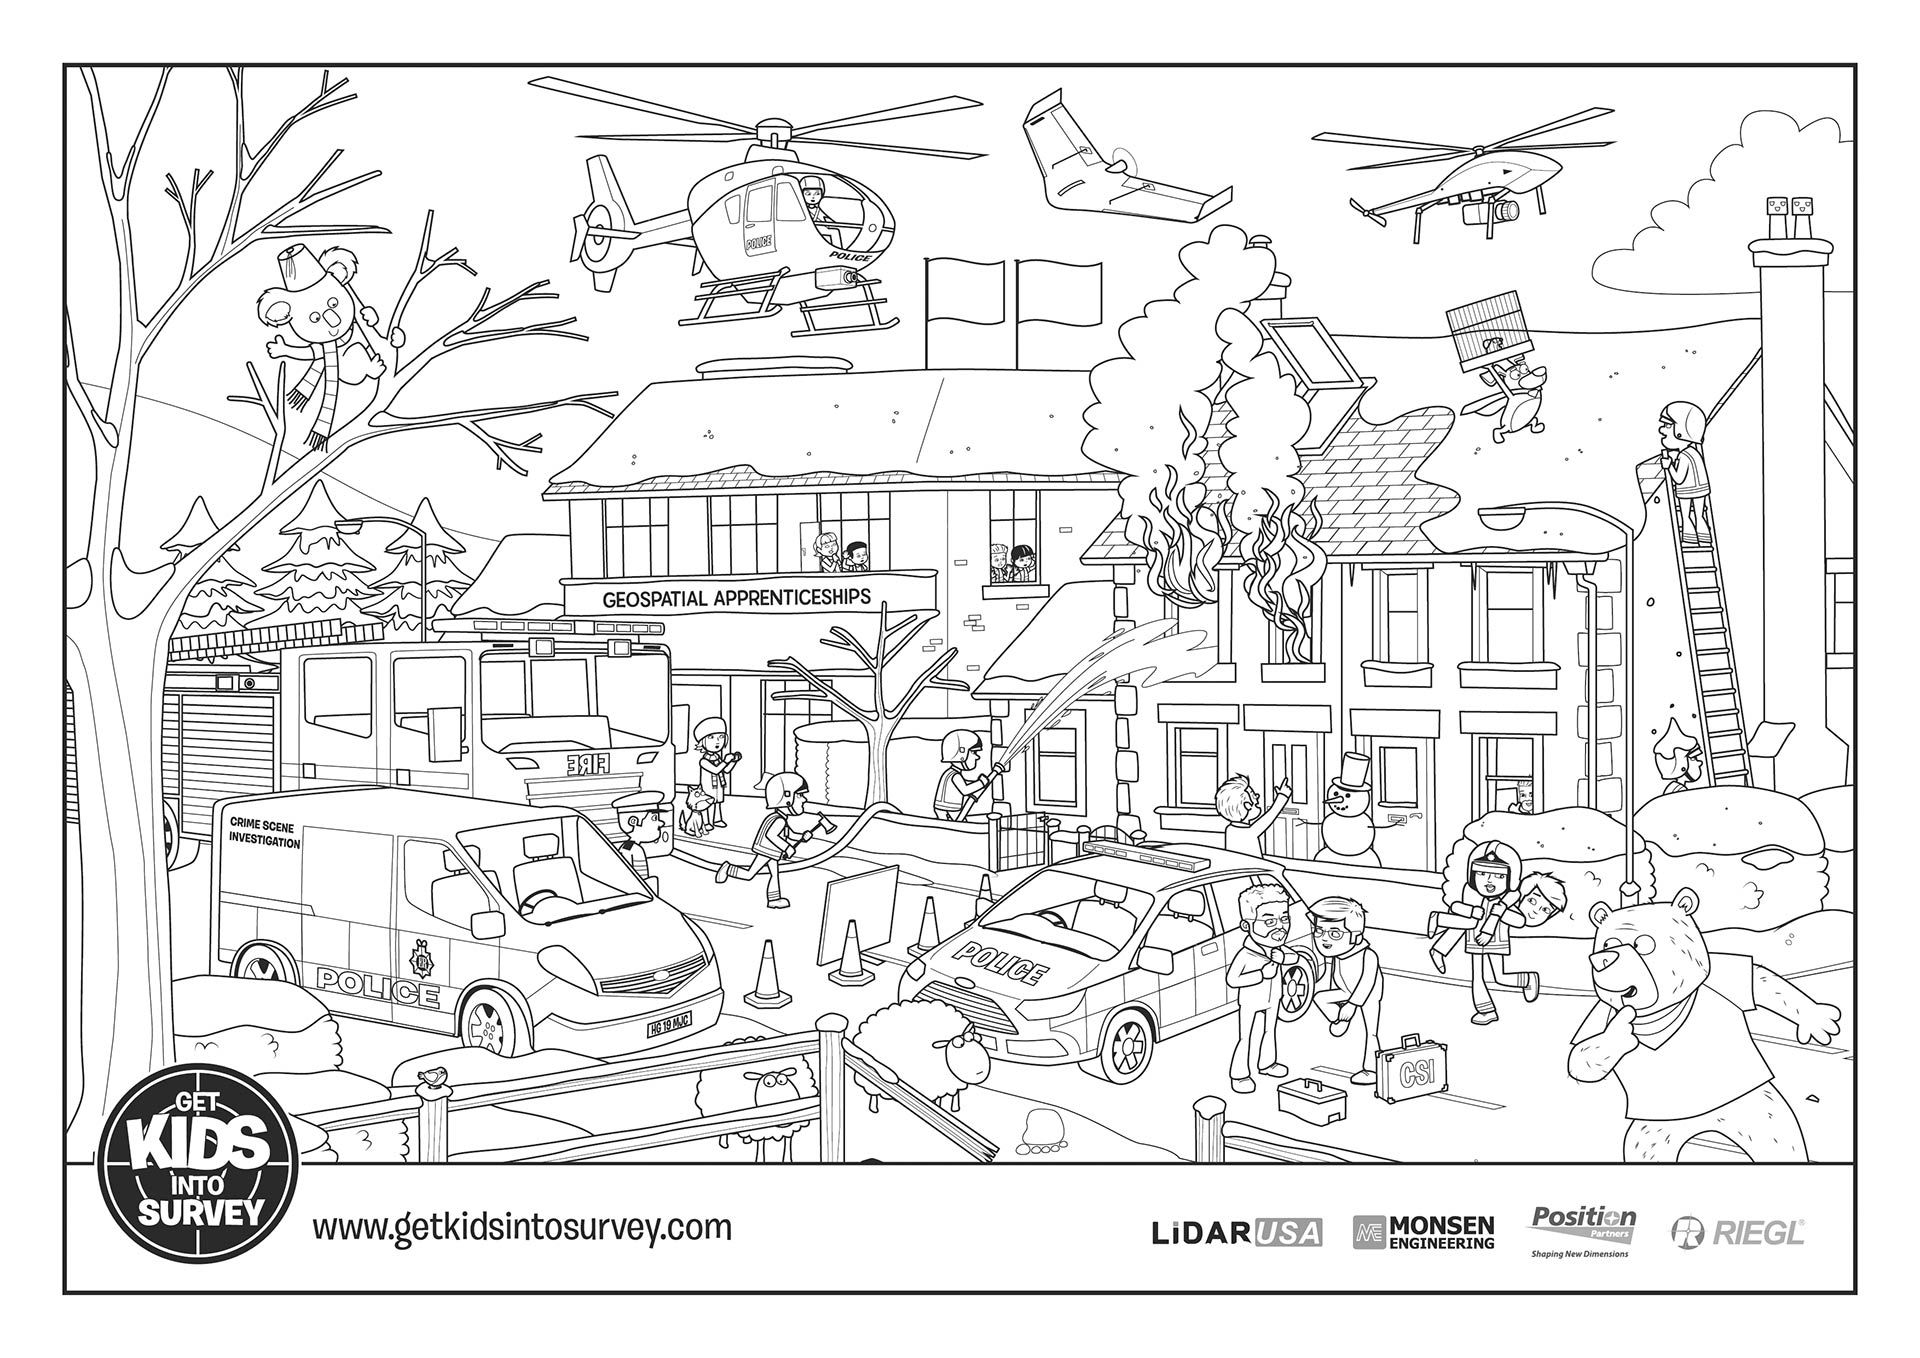 Crime Scene Colouring Sheets - The Fire - Get Kids Into Survey